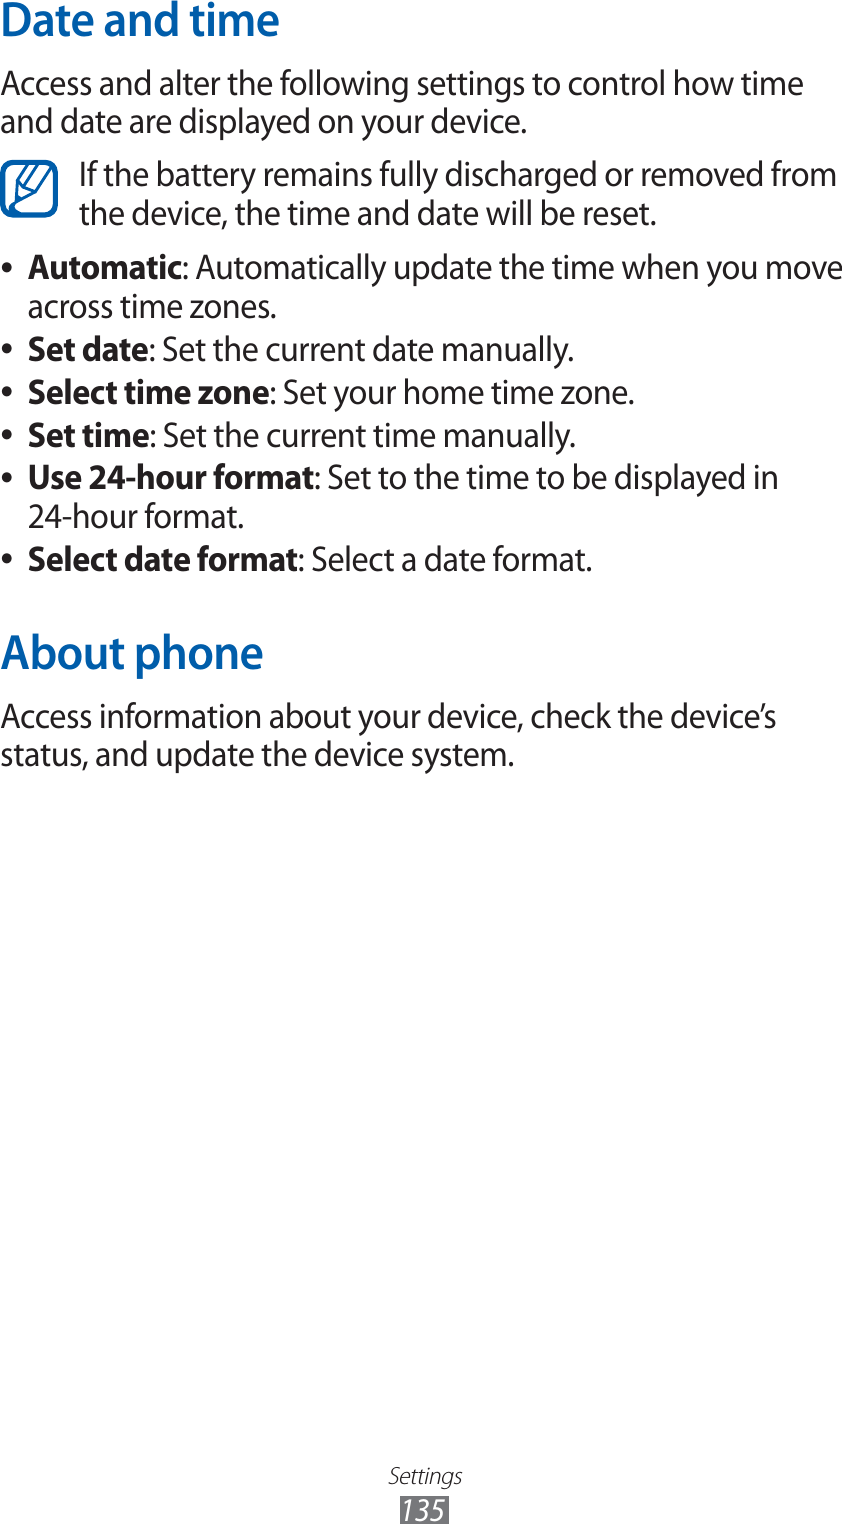 Settings135Date and timeAccess and alter the following settings to control how time and date are displayed on your device.If the battery remains fully discharged or removed from the device, the time and date will be reset.Automatic ●: Automatically update the time when you move across time zones.Set date ●: Set the current date manually.Select time zone ●: Set your home time zone.Set time ●: Set the current time manually.Use 24-hour format ●: Set to the time to be displayed in 24-hour format.Select date format ●: Select a date format.About phoneAccess information about your device, check the device’s status, and update the device system.